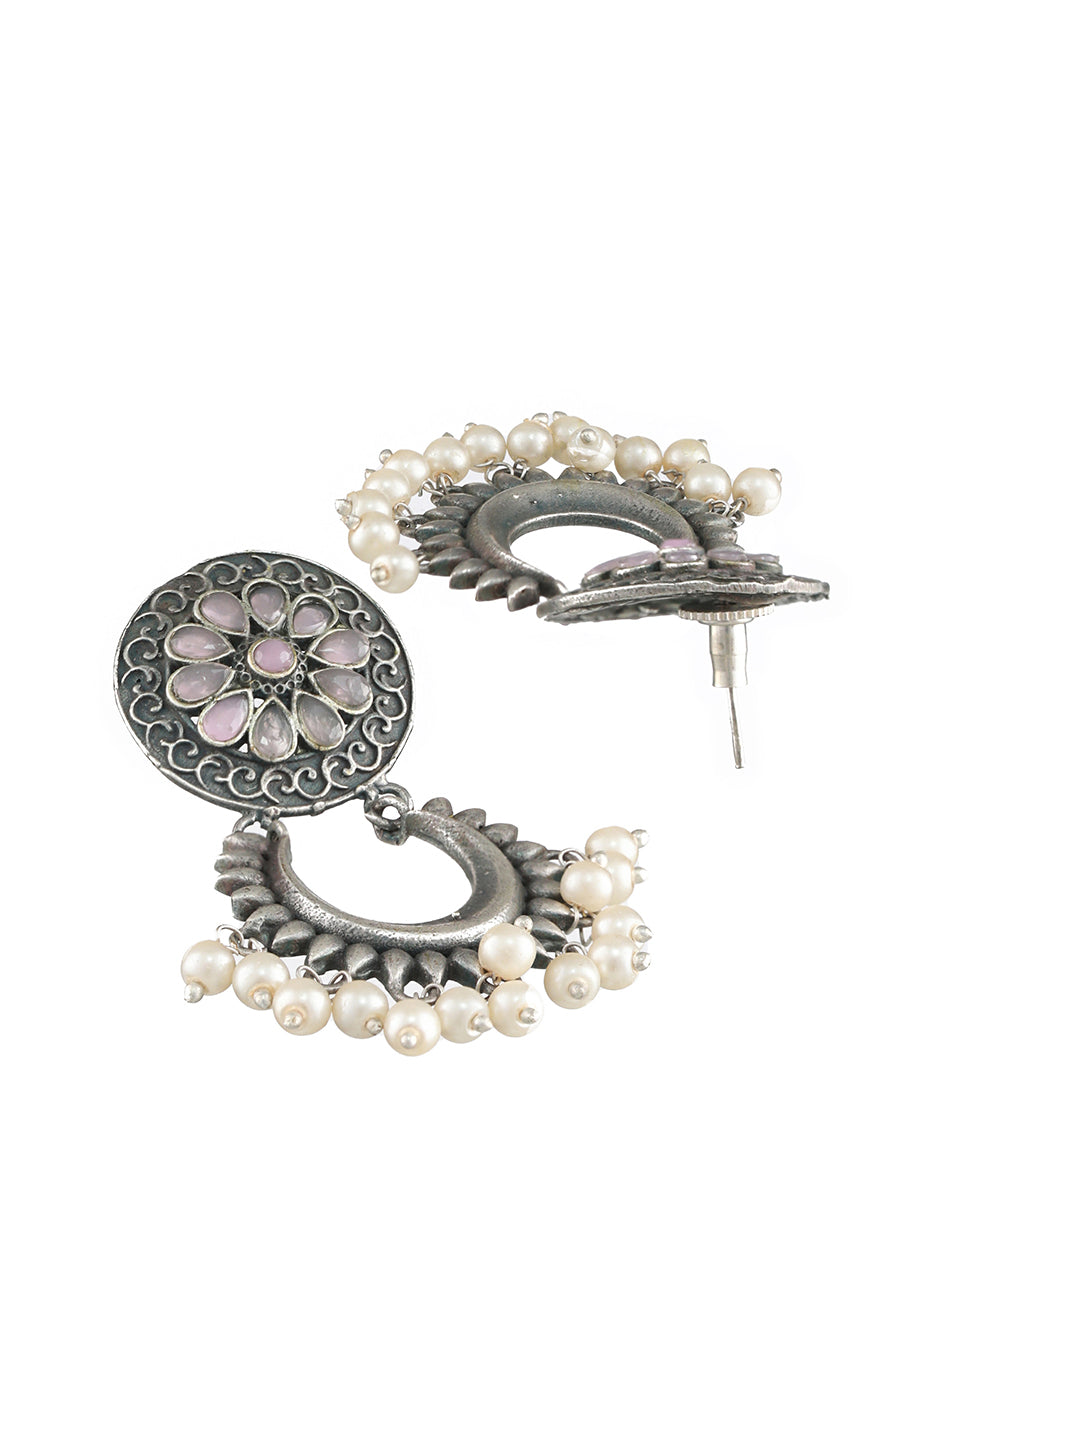 Pink & Silver-Plated Oxidised Pearls Contemporary Chandbalis Earrings - Jazzandsizzle